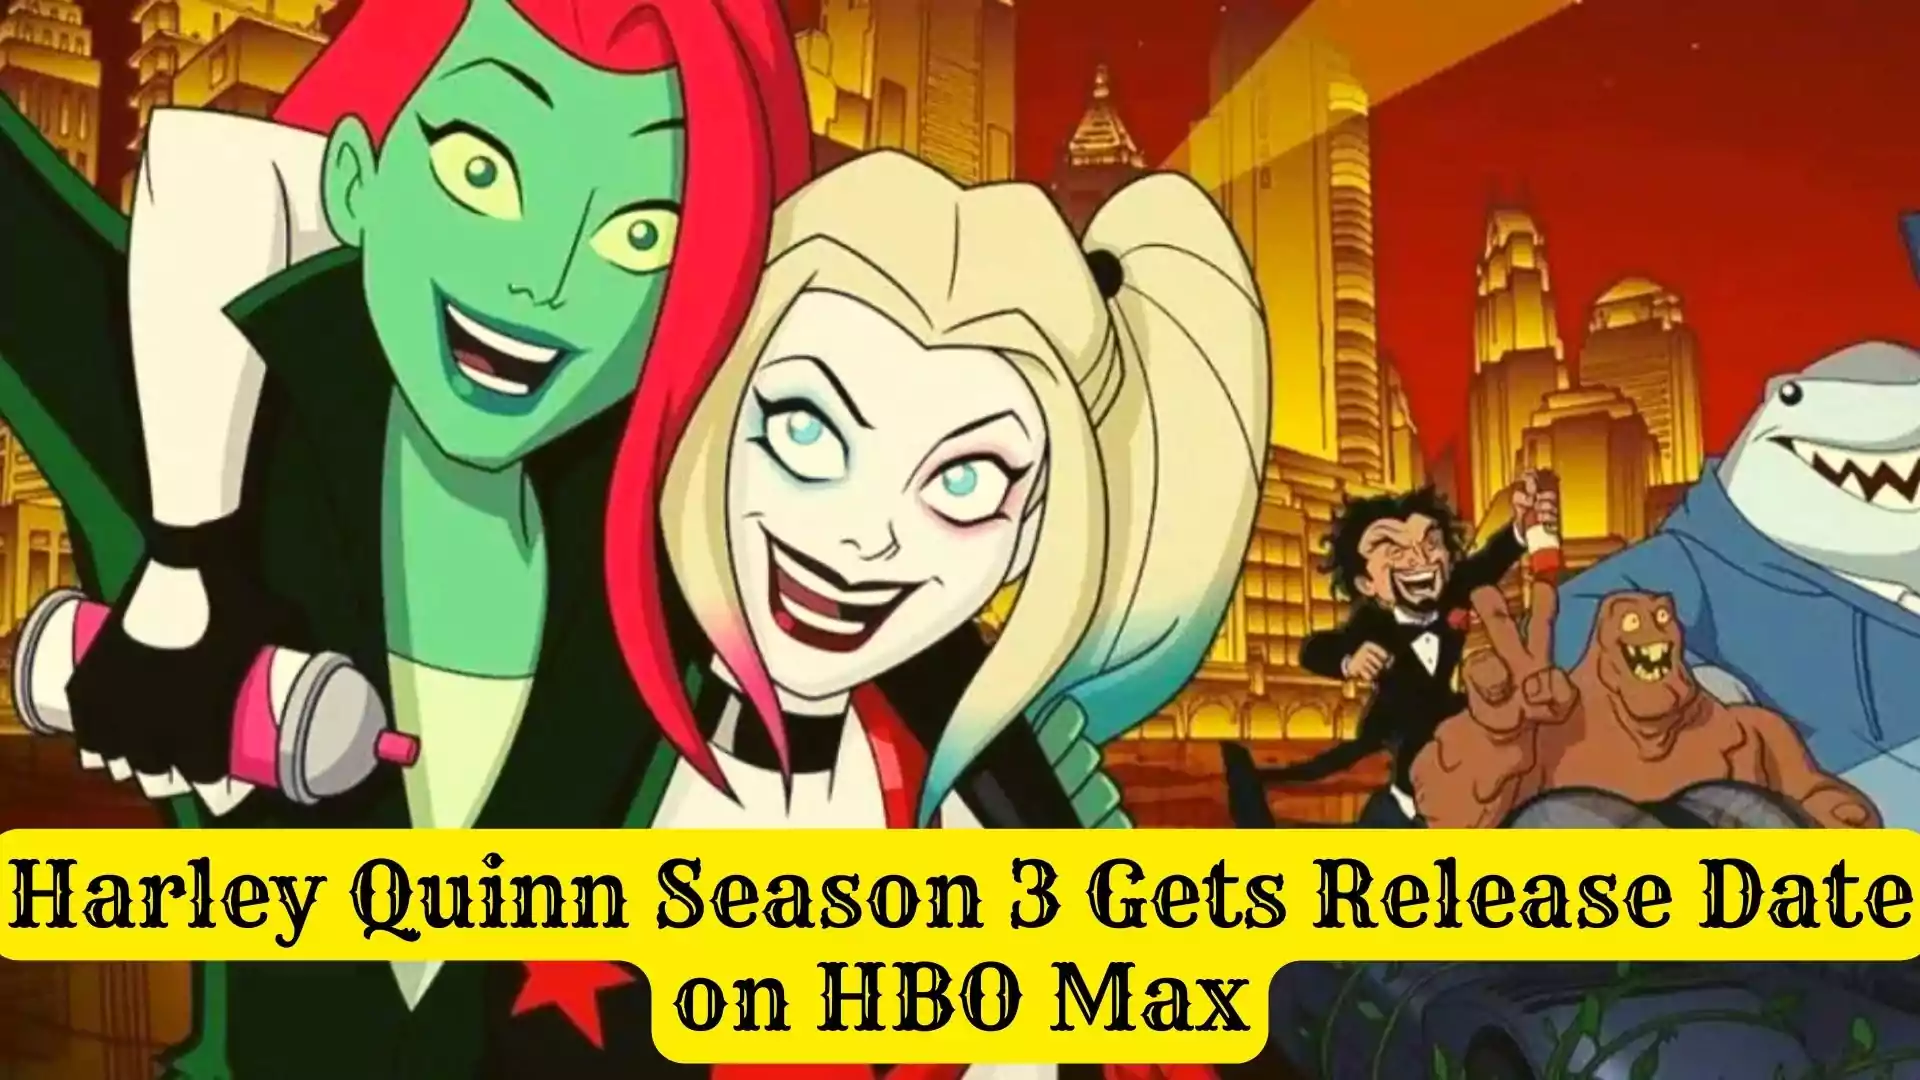 Harley Quinn Season 3 Gets Release Date on HBO Max